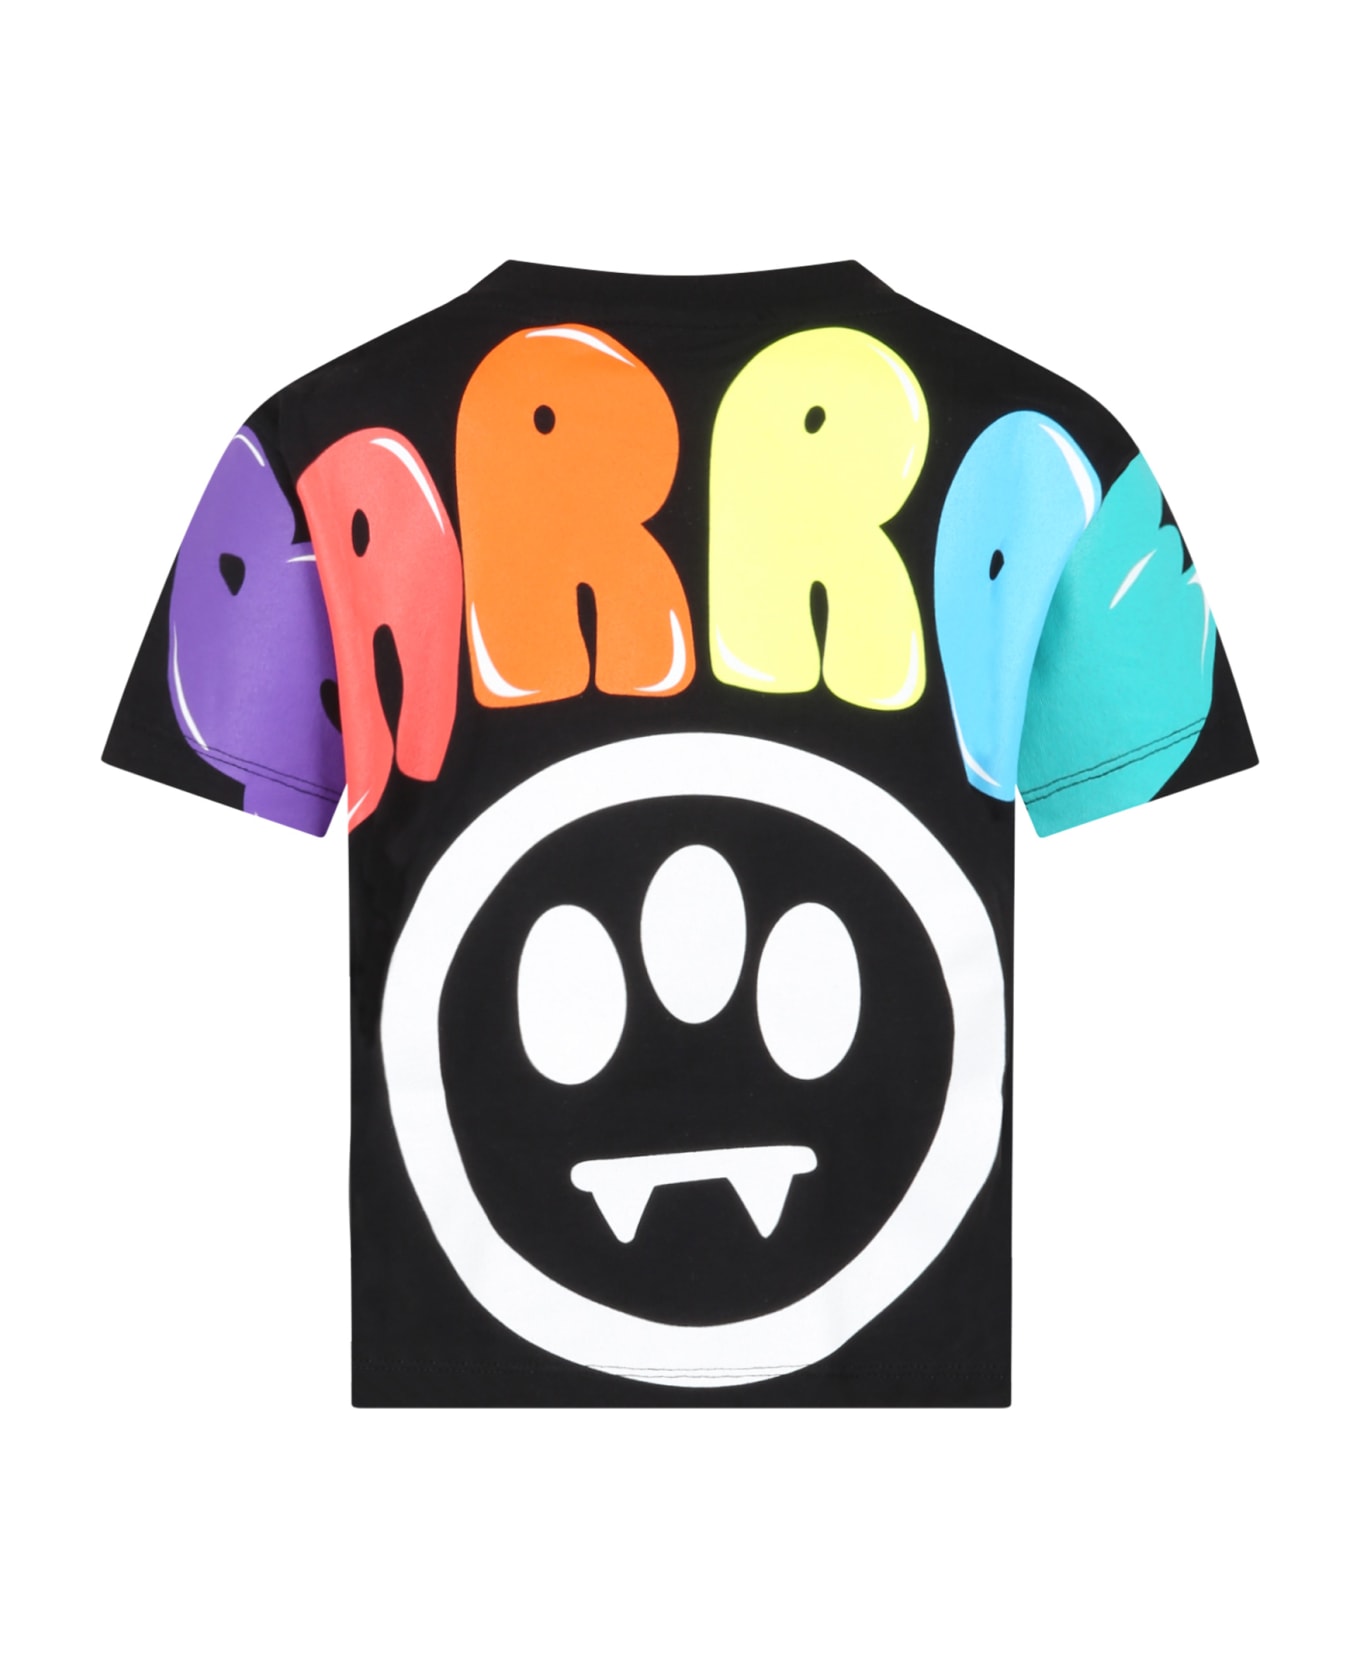 Barrow Black T-shirt For Kids With Smiley And Logo - Nero